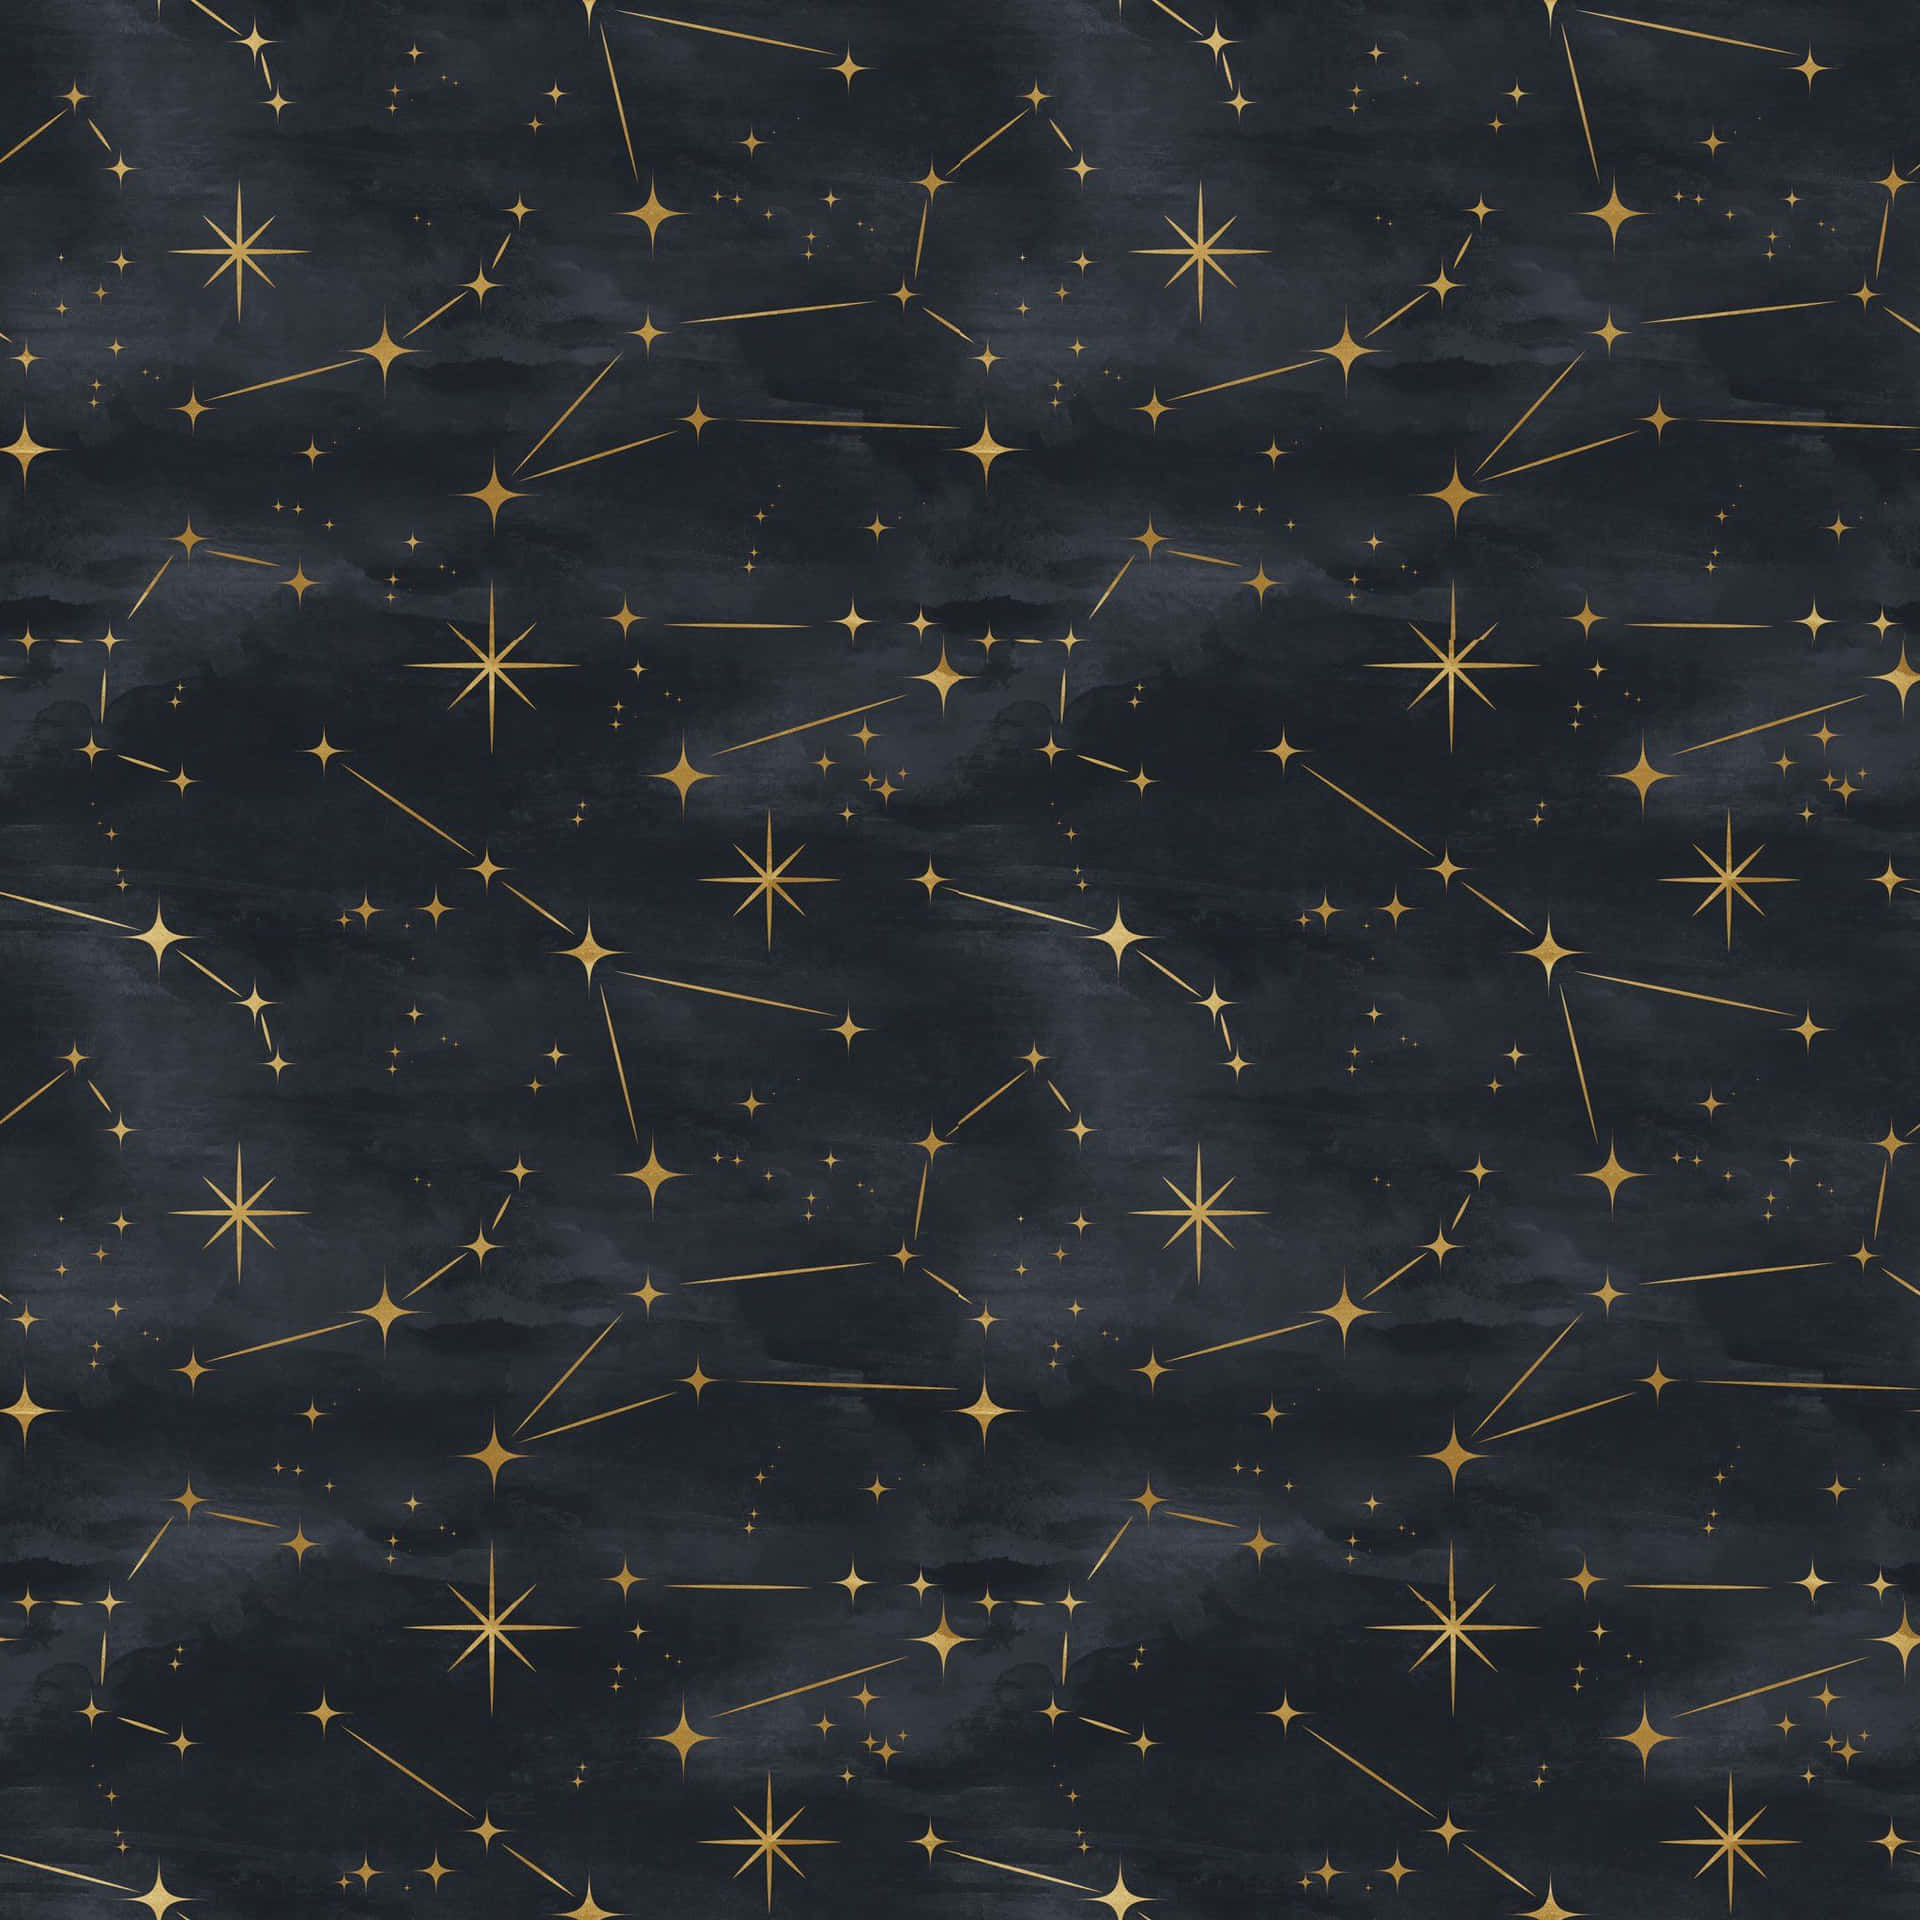 Stunning View of Constellations in the Night Sky Wallpaper